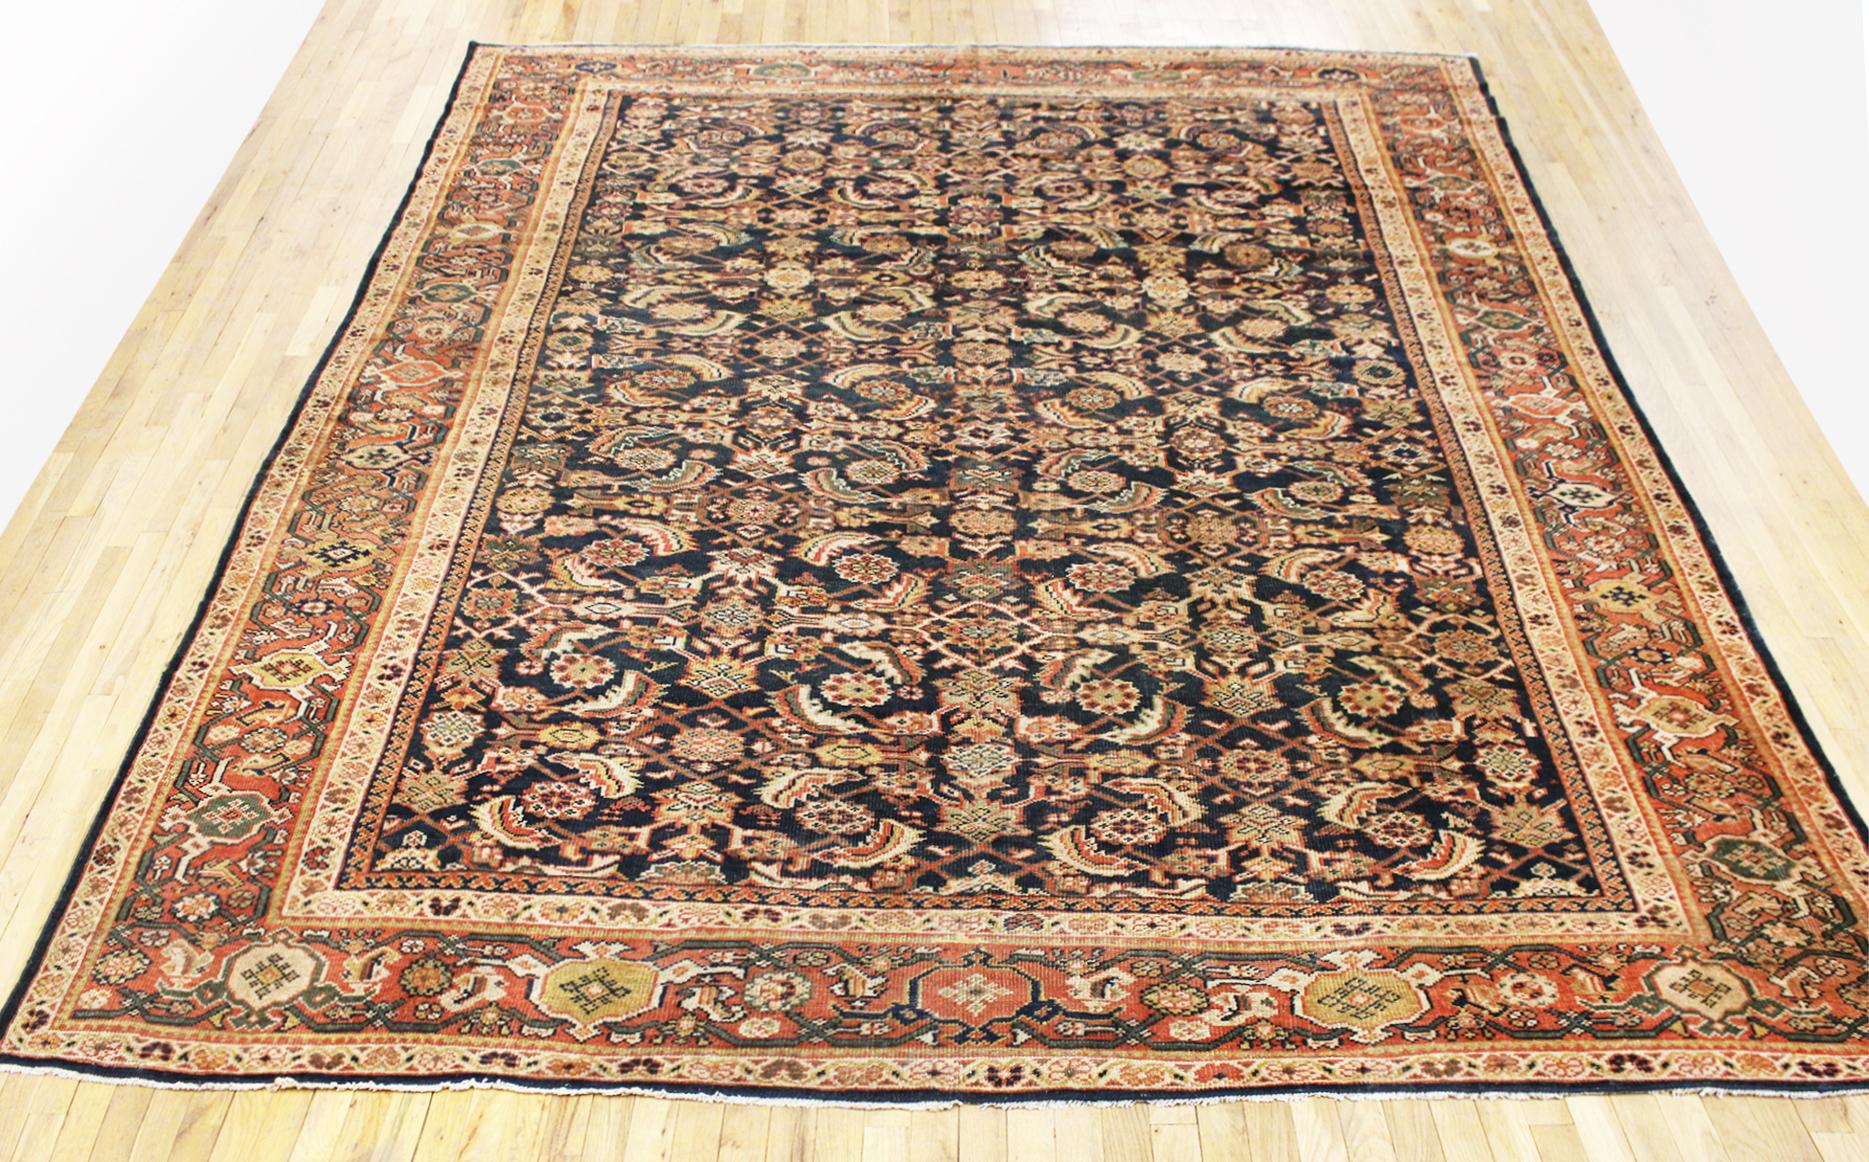 Antique Persian Sultanabad rug, Room size, circa 1910

A one-of-a-kind antique Persian Sultanabad oriental carpet with a thick and lustrous wool pile, knotted by hand, with soft touch and great resistance to wear. This carpet features an Herati